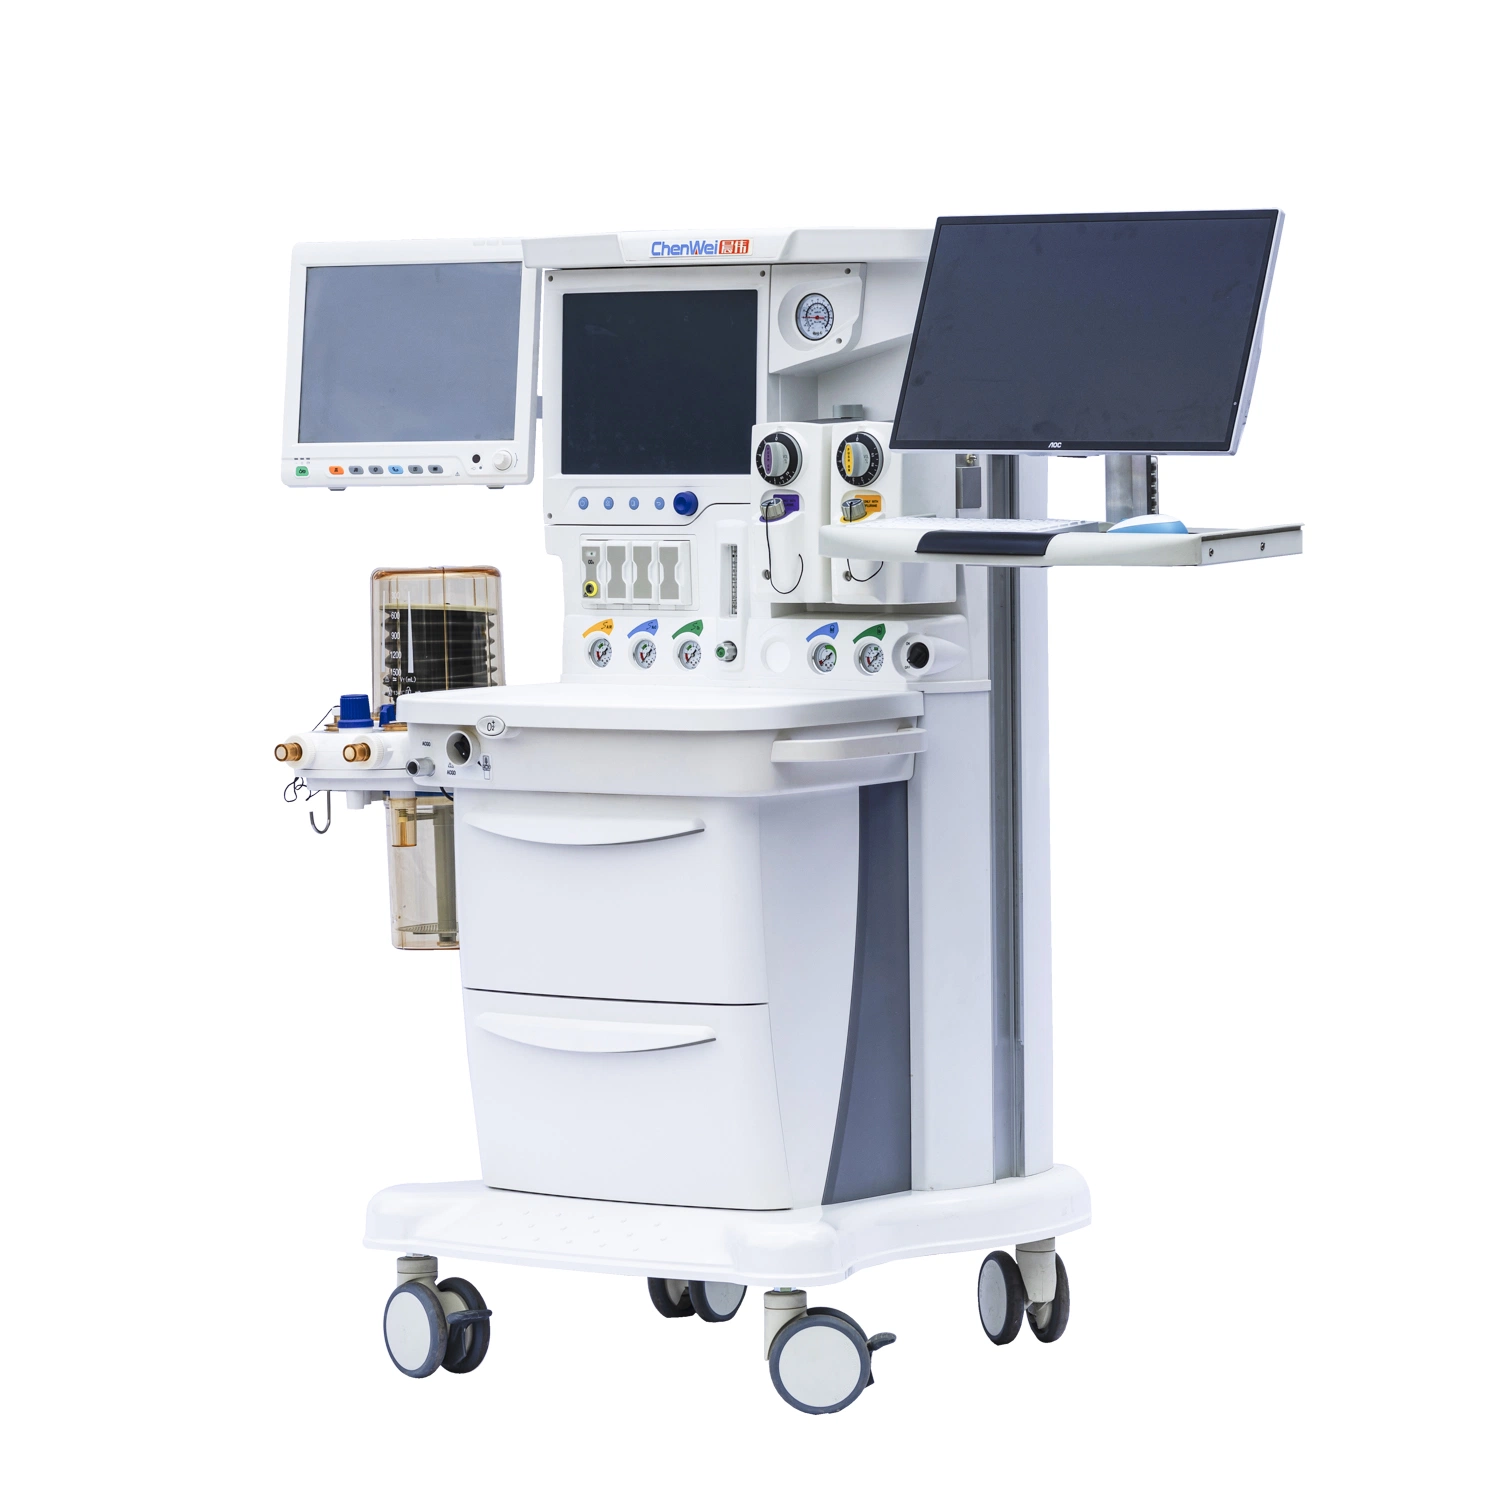 Trusted CE&ISO Hospital Medical Anesthesia Machine - Model Cwm-303